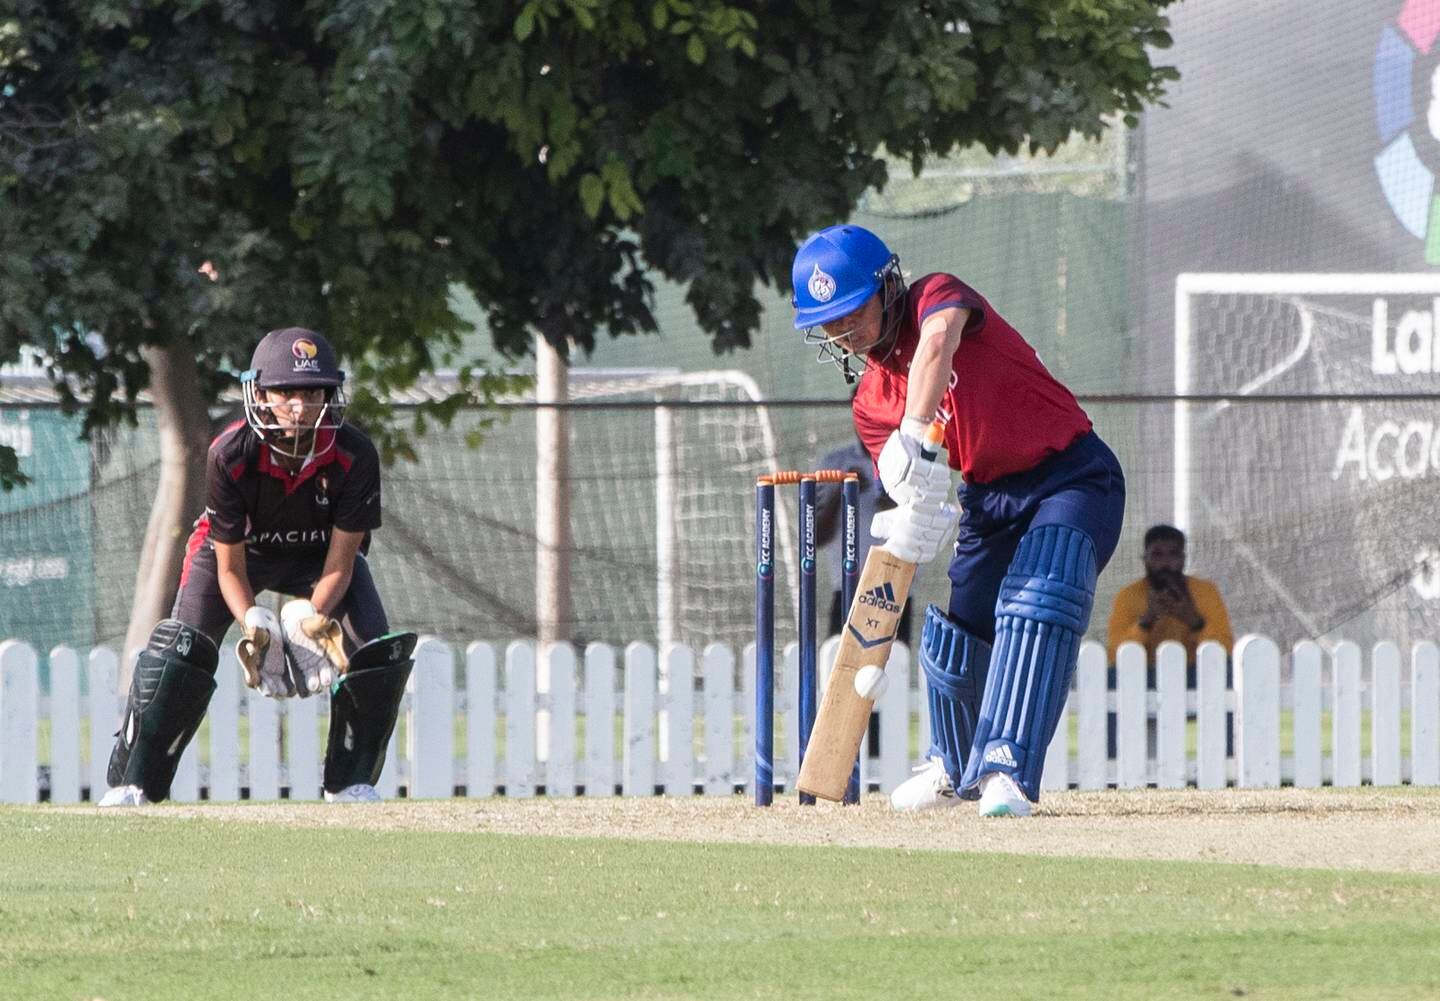 Thailand captain Naruemol Chaiwai, batting against the UAE, insists her team's target is to win the Qualifier tournament. Ruel Pableo for The National